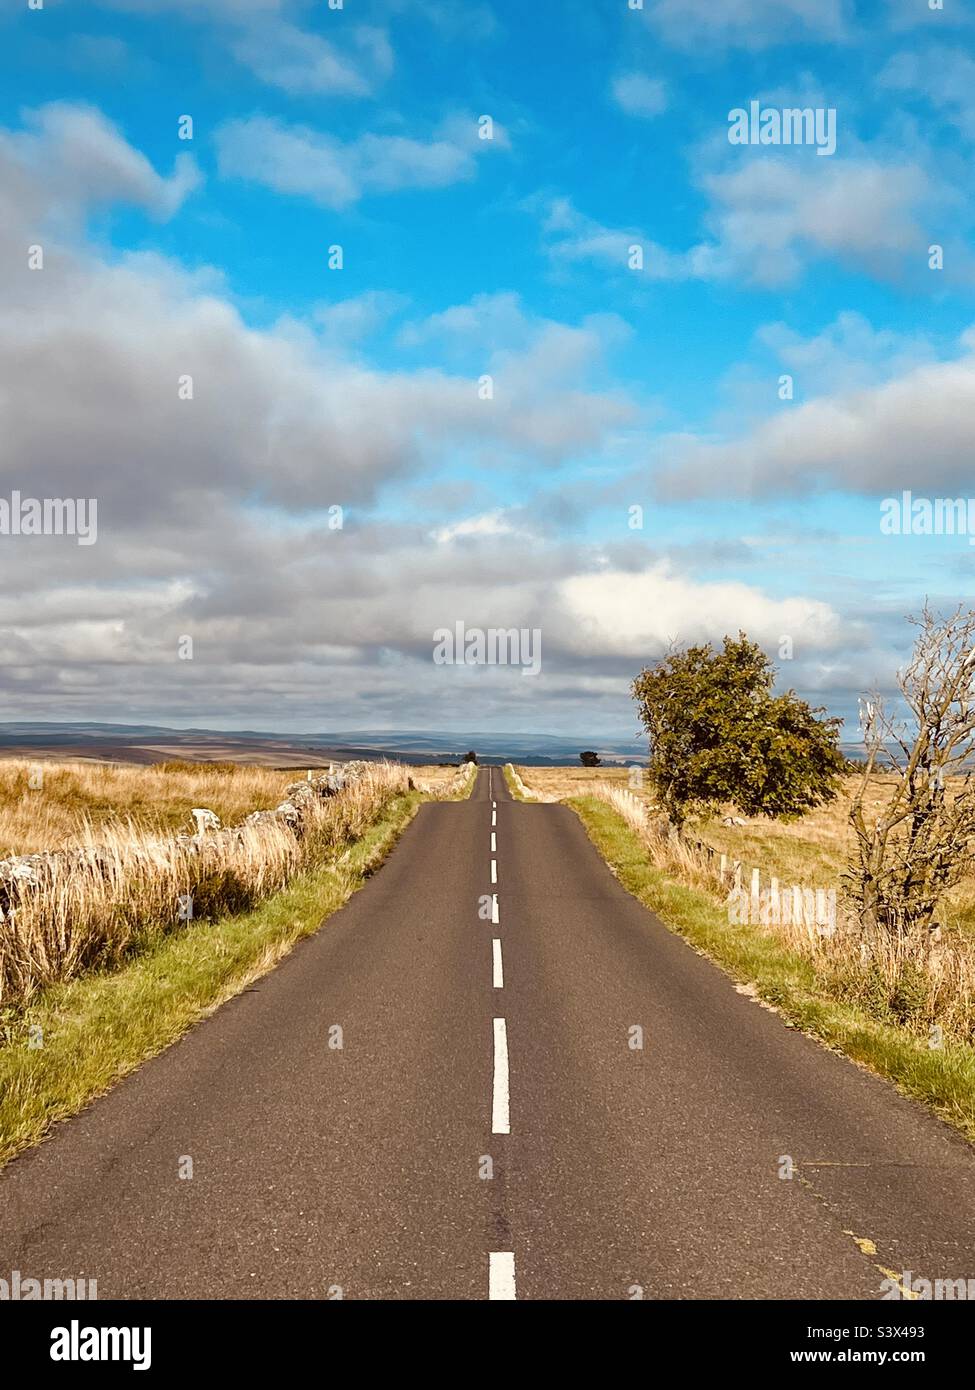 Diminishing perspective on an empty road Stock Photo